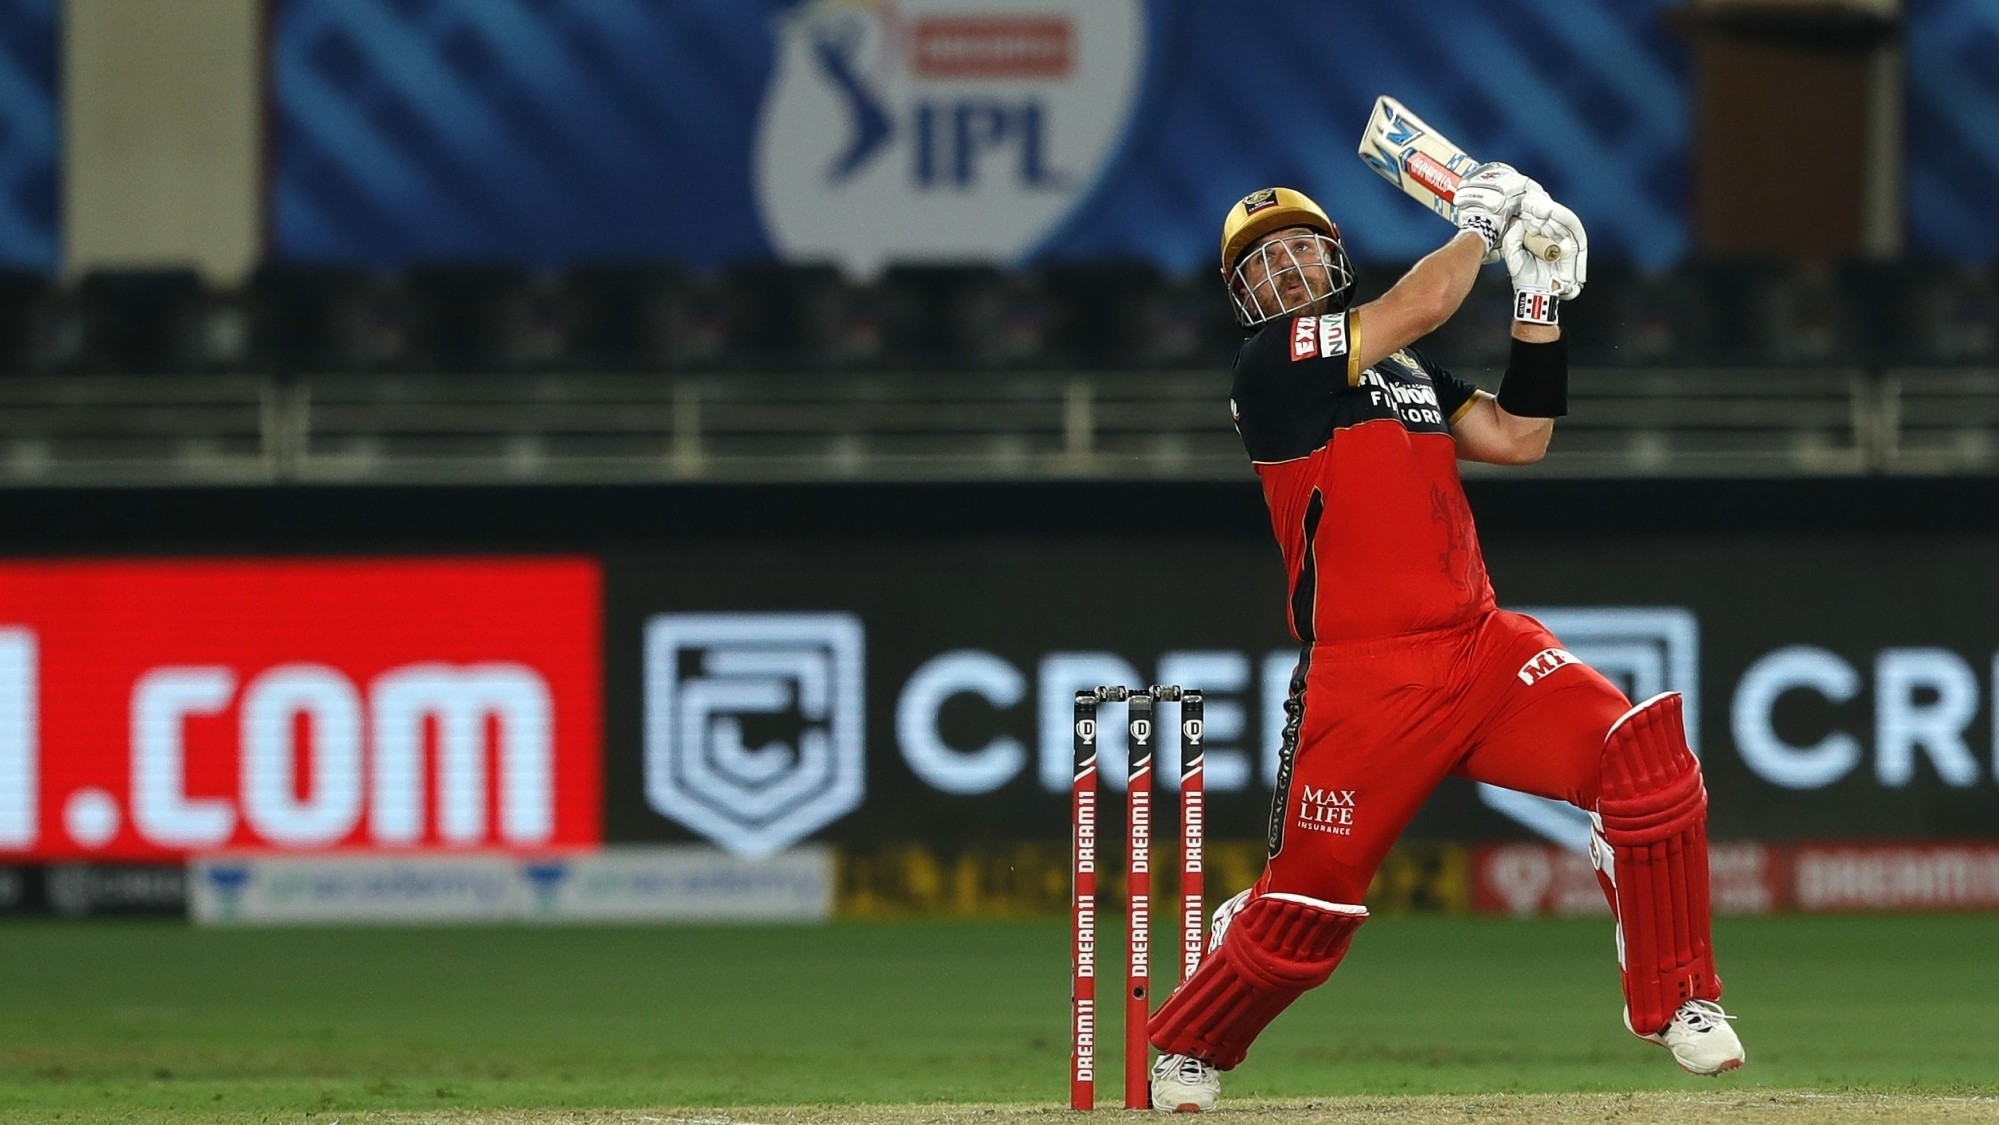 IPL 2020: Aaron Finch expects dew to play a big part in the tournament